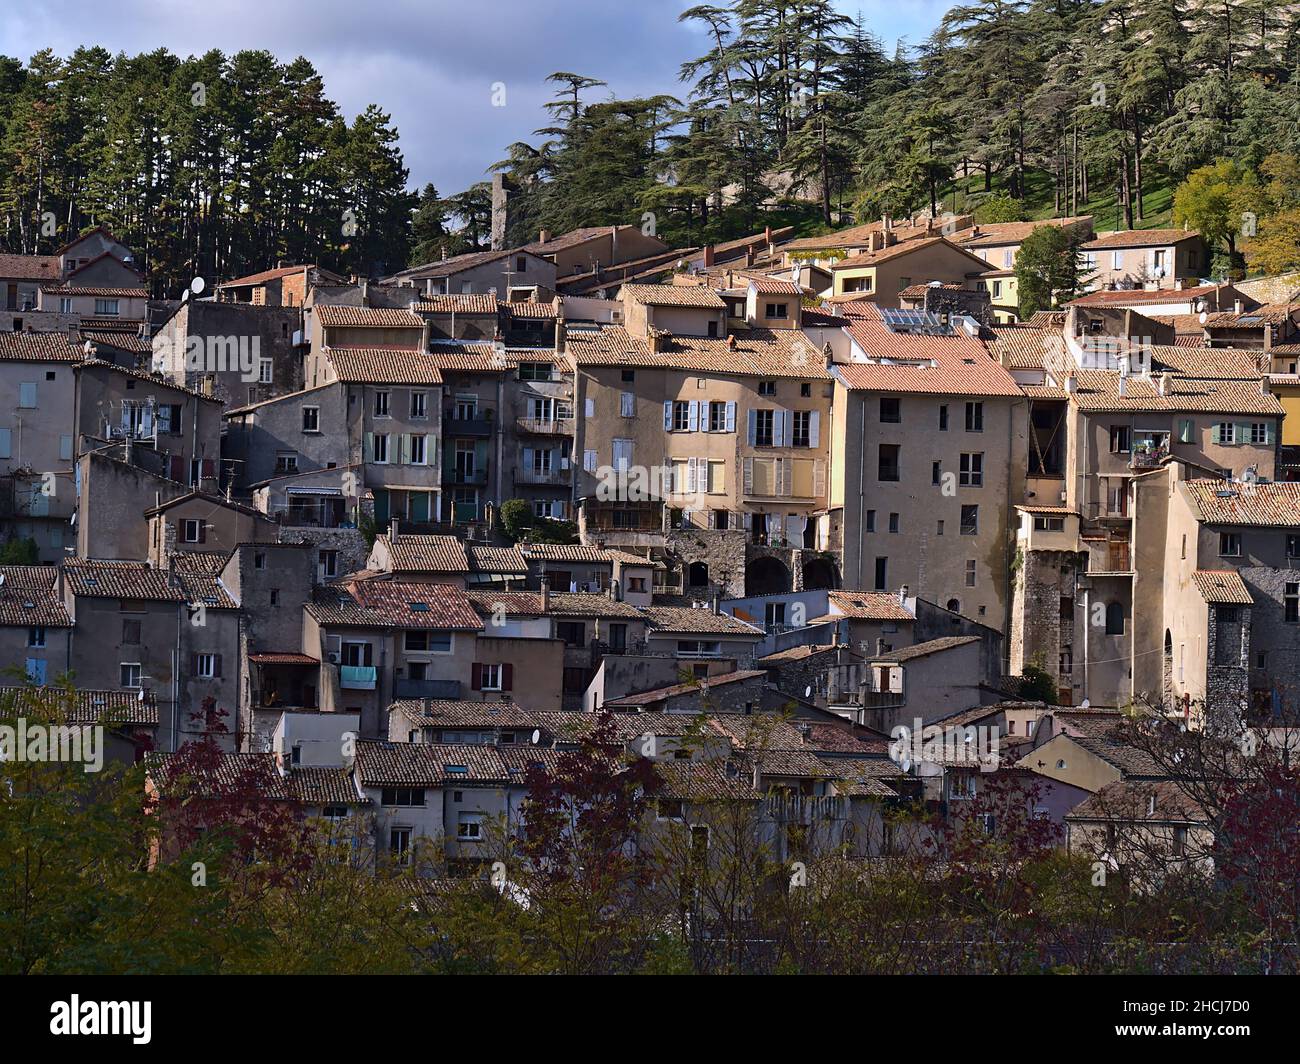 Beautiful view of the historic downtown of small city Sisteron in Provence, France with characteristic old buildings standing close together. Stock Photo